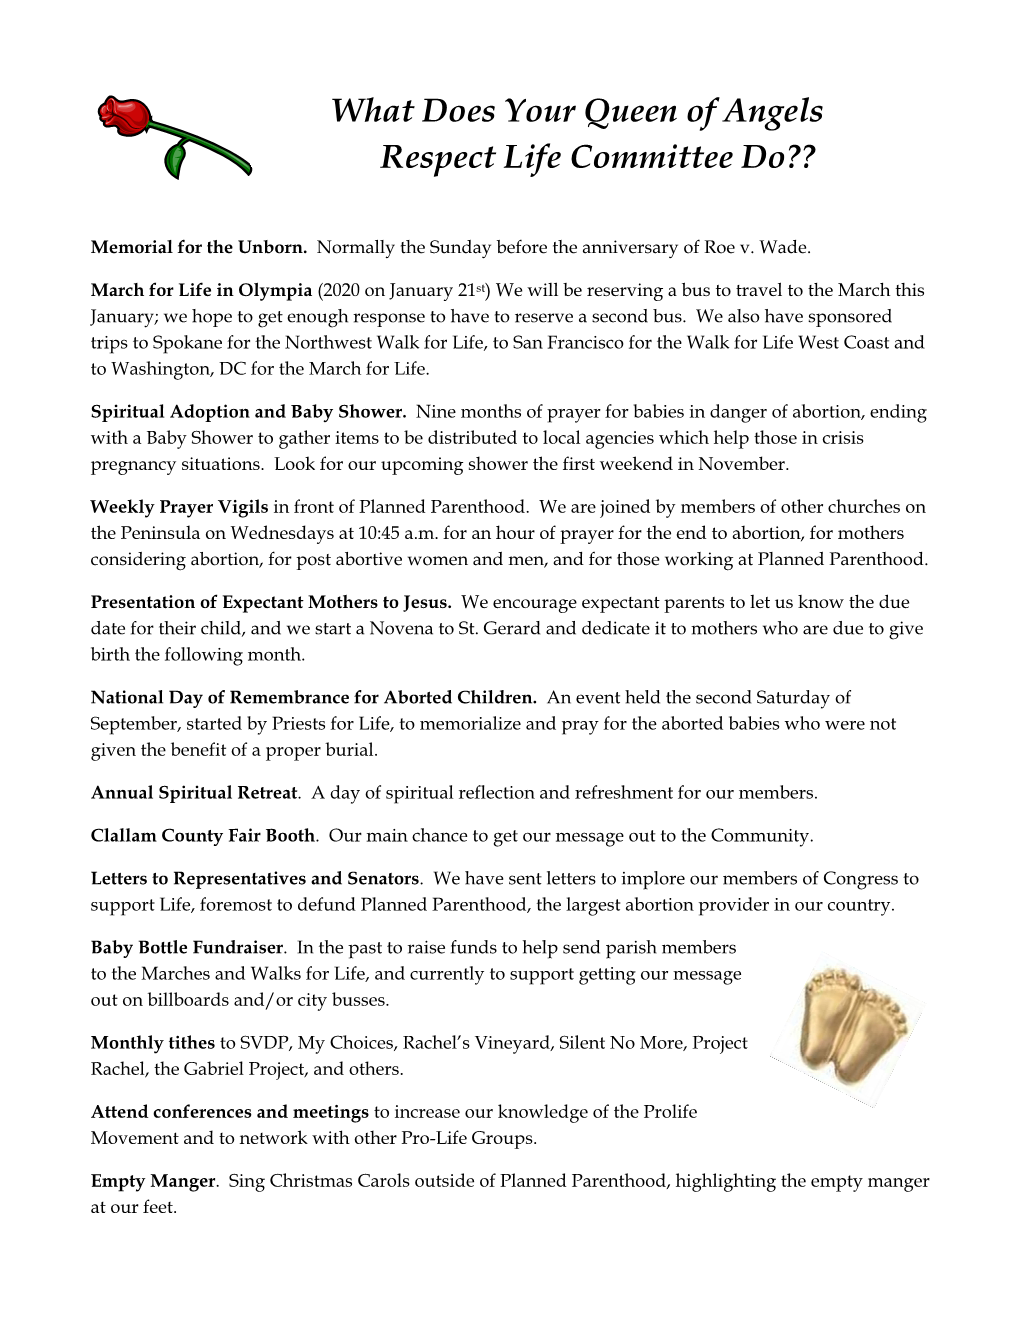 What Does Your Queen of Angels Respect Life Committee Do??